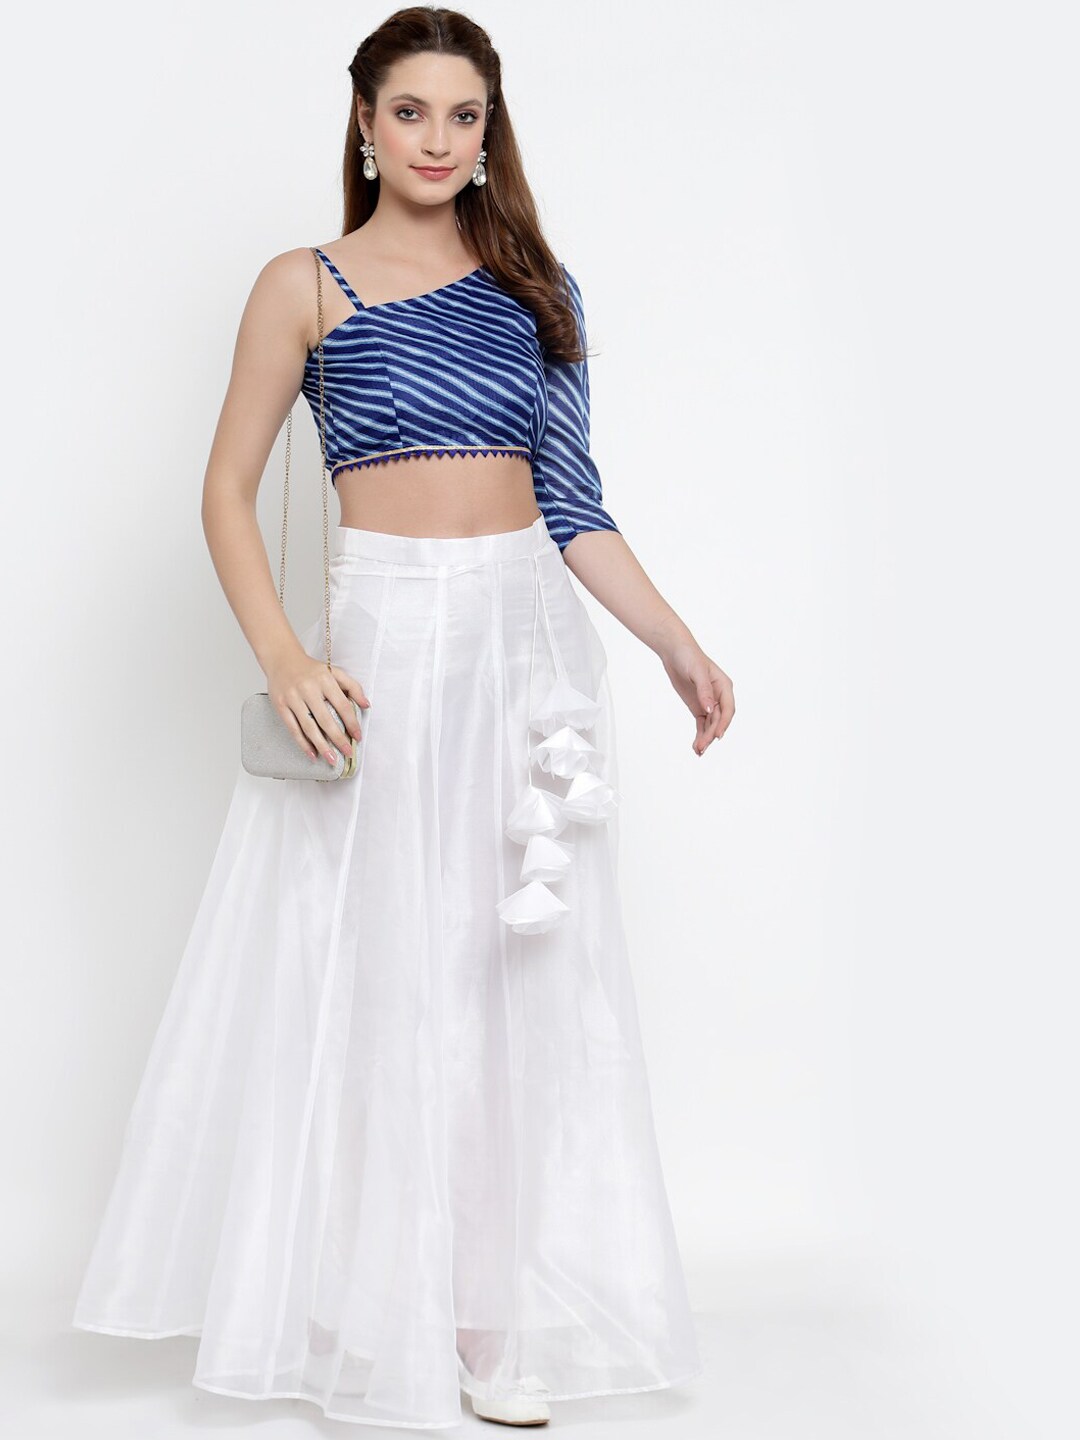 NEUDIS Women White & Blue Solid Organza Flared Maxi Lehenga Skirt With Top Price in India